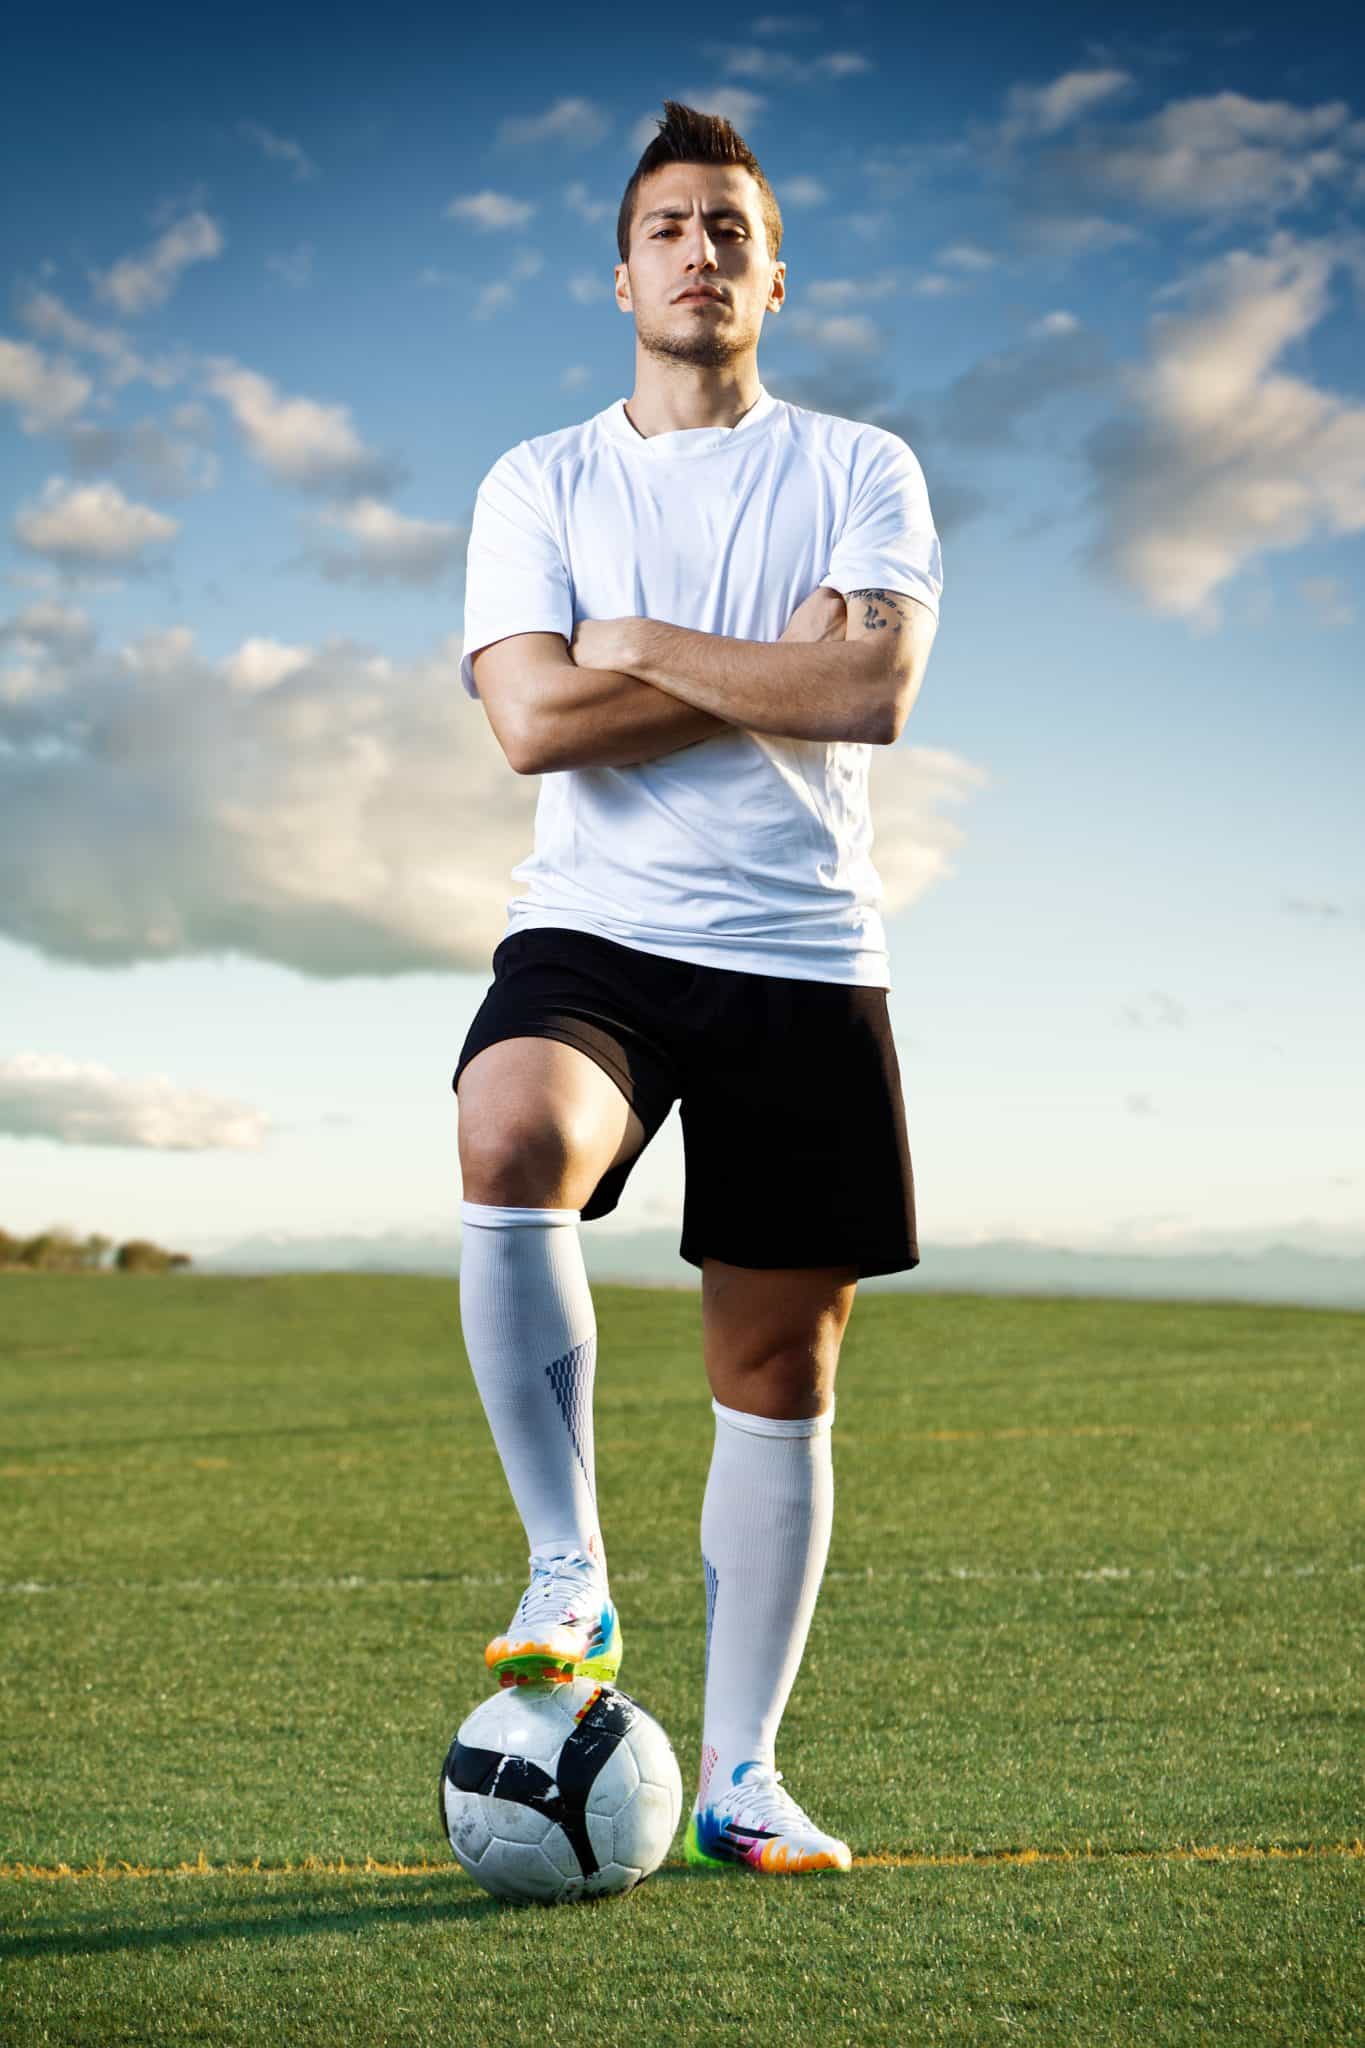 How to Become a Great Soccer Player - A Soccer Player's Complete Guide